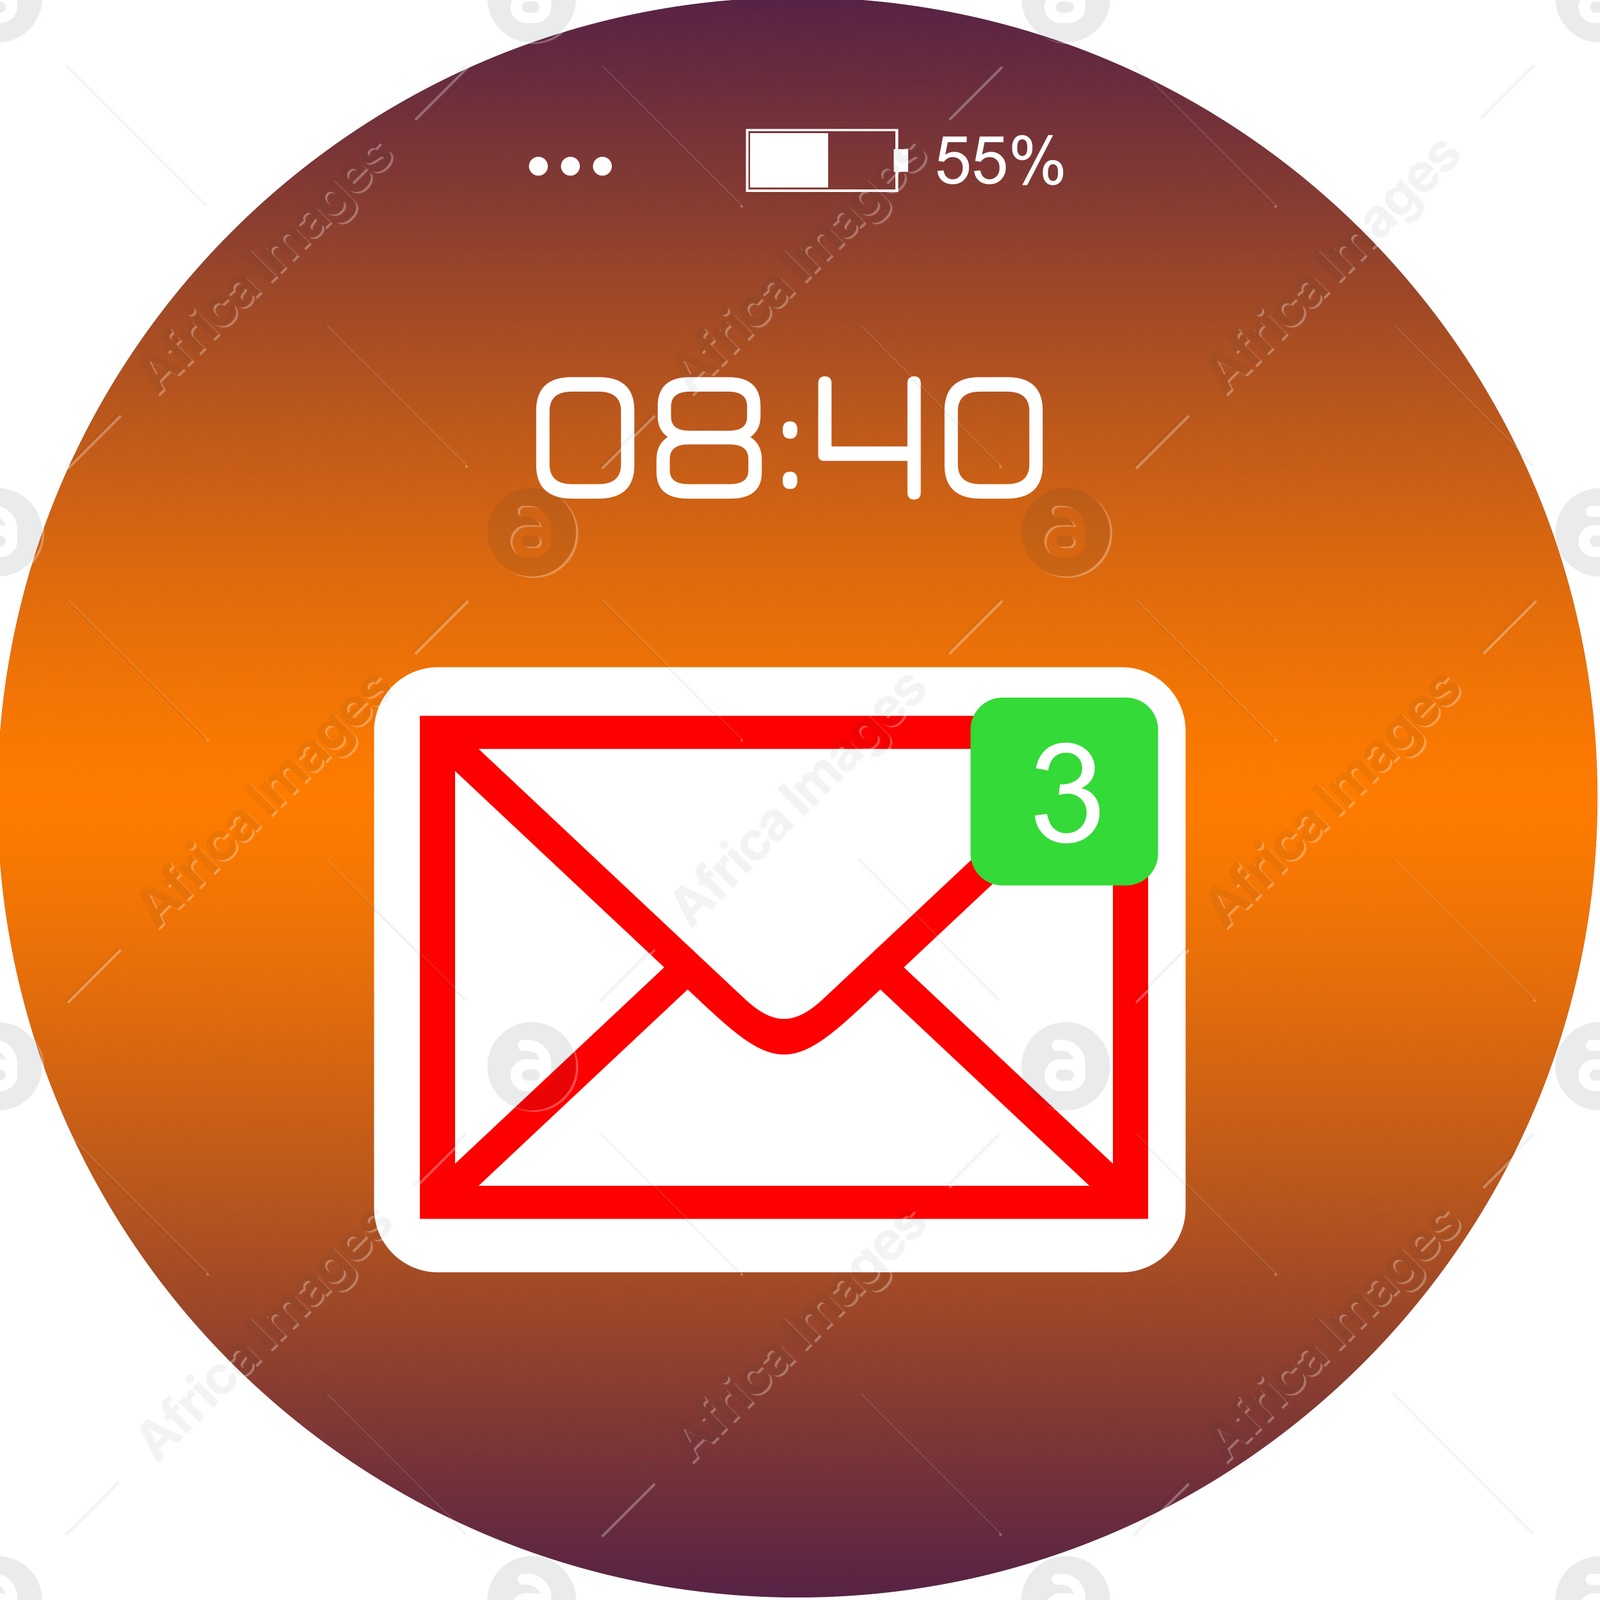 Illustration of Smart watch displaying three inbox letters in mail application